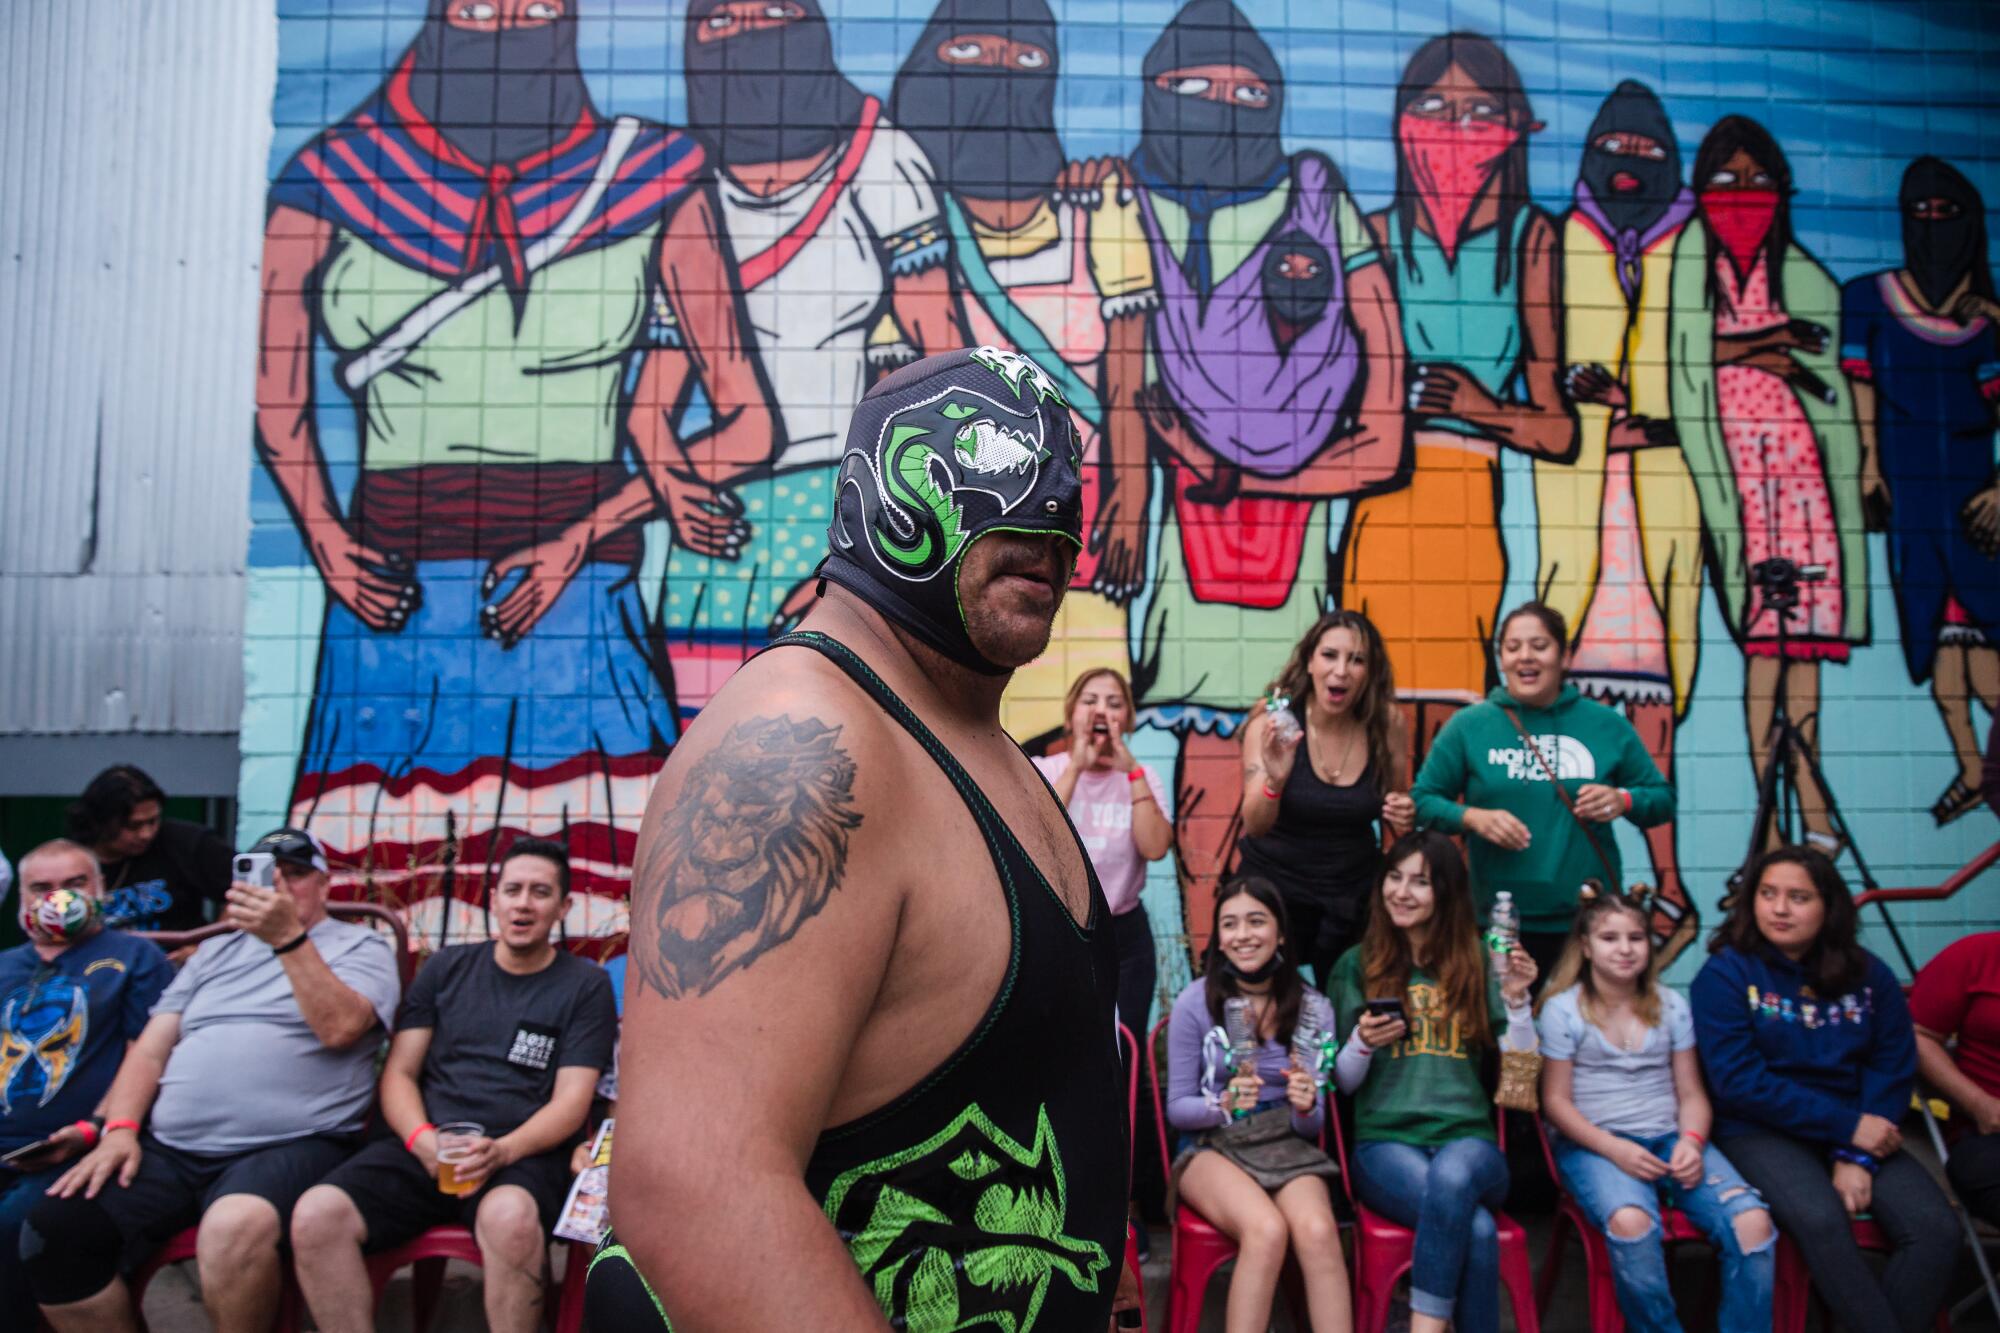 Black Mamba during the Baja Stars USA Lucha Libre event at the Mujeres Brew House in Logan Heights.